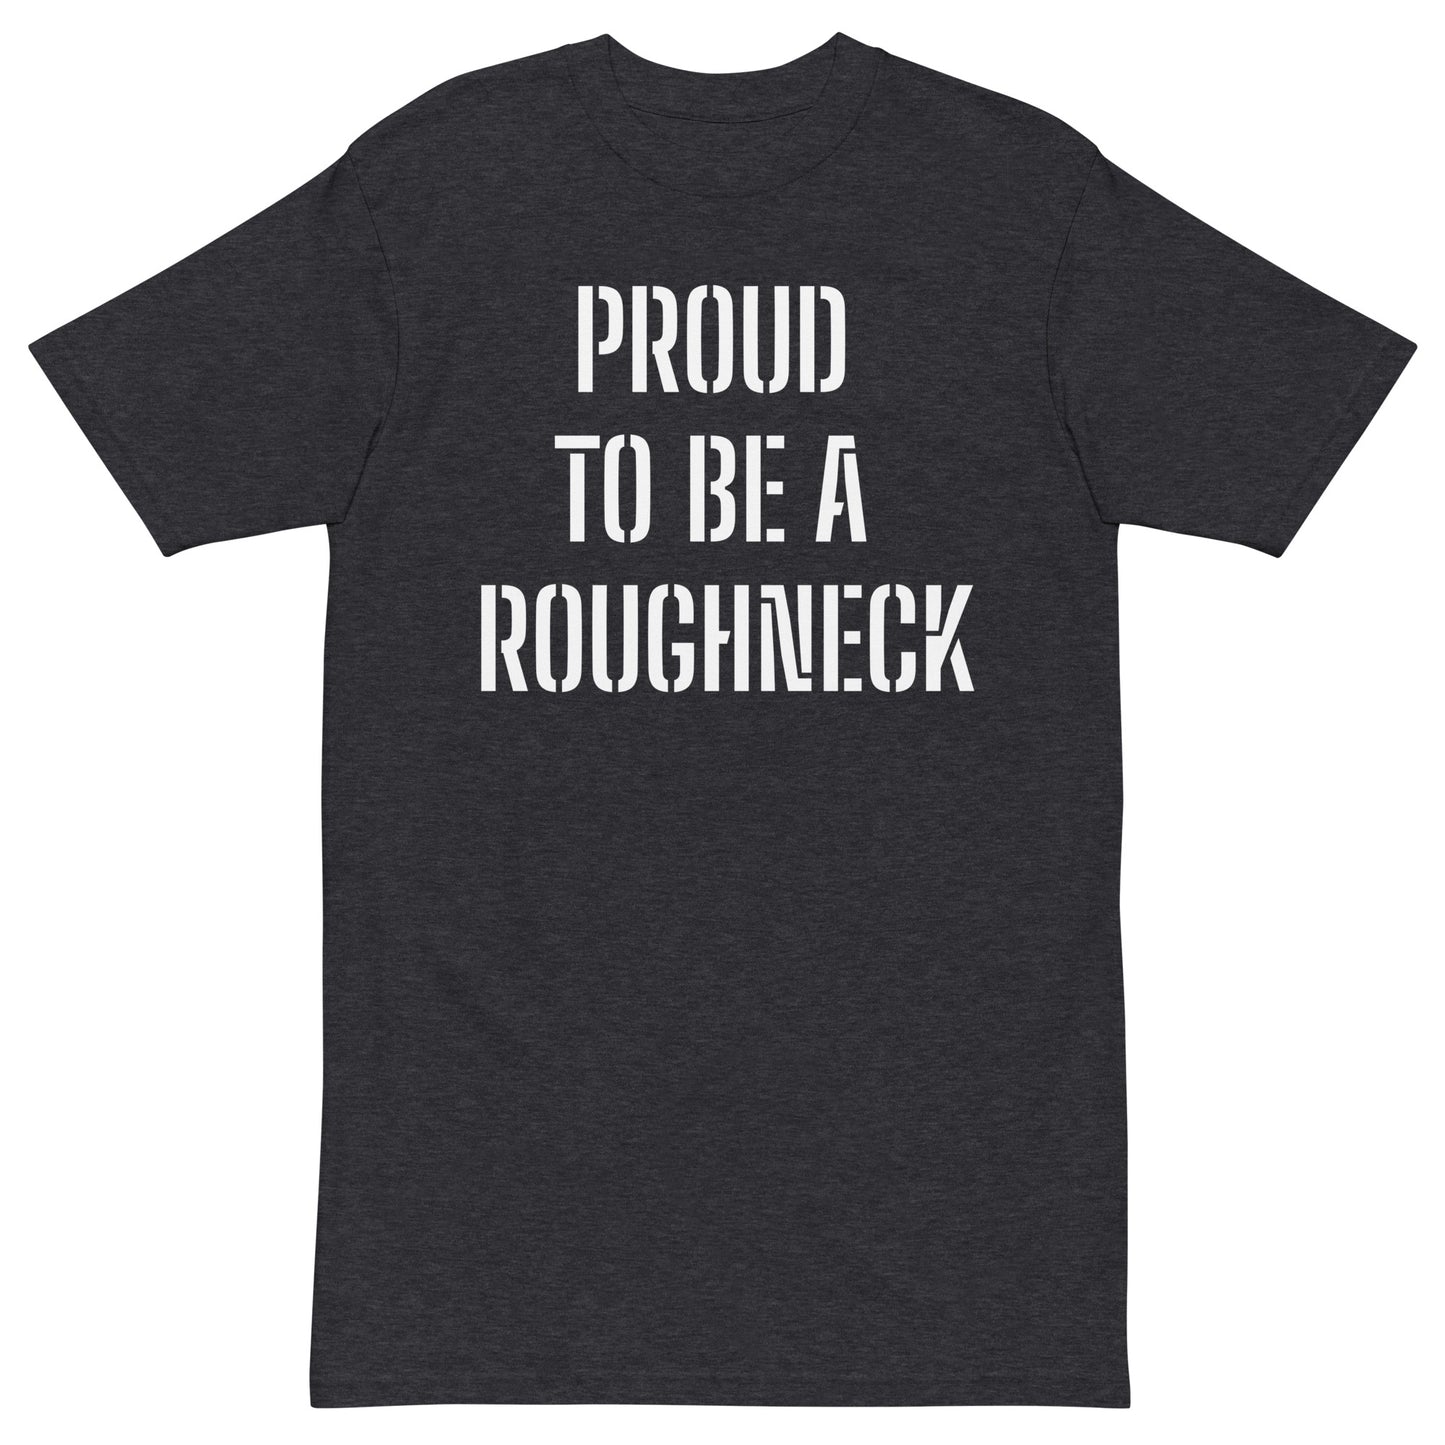 PROUD TO BE A ROUGHNECK Men’s premium heavyweight tee